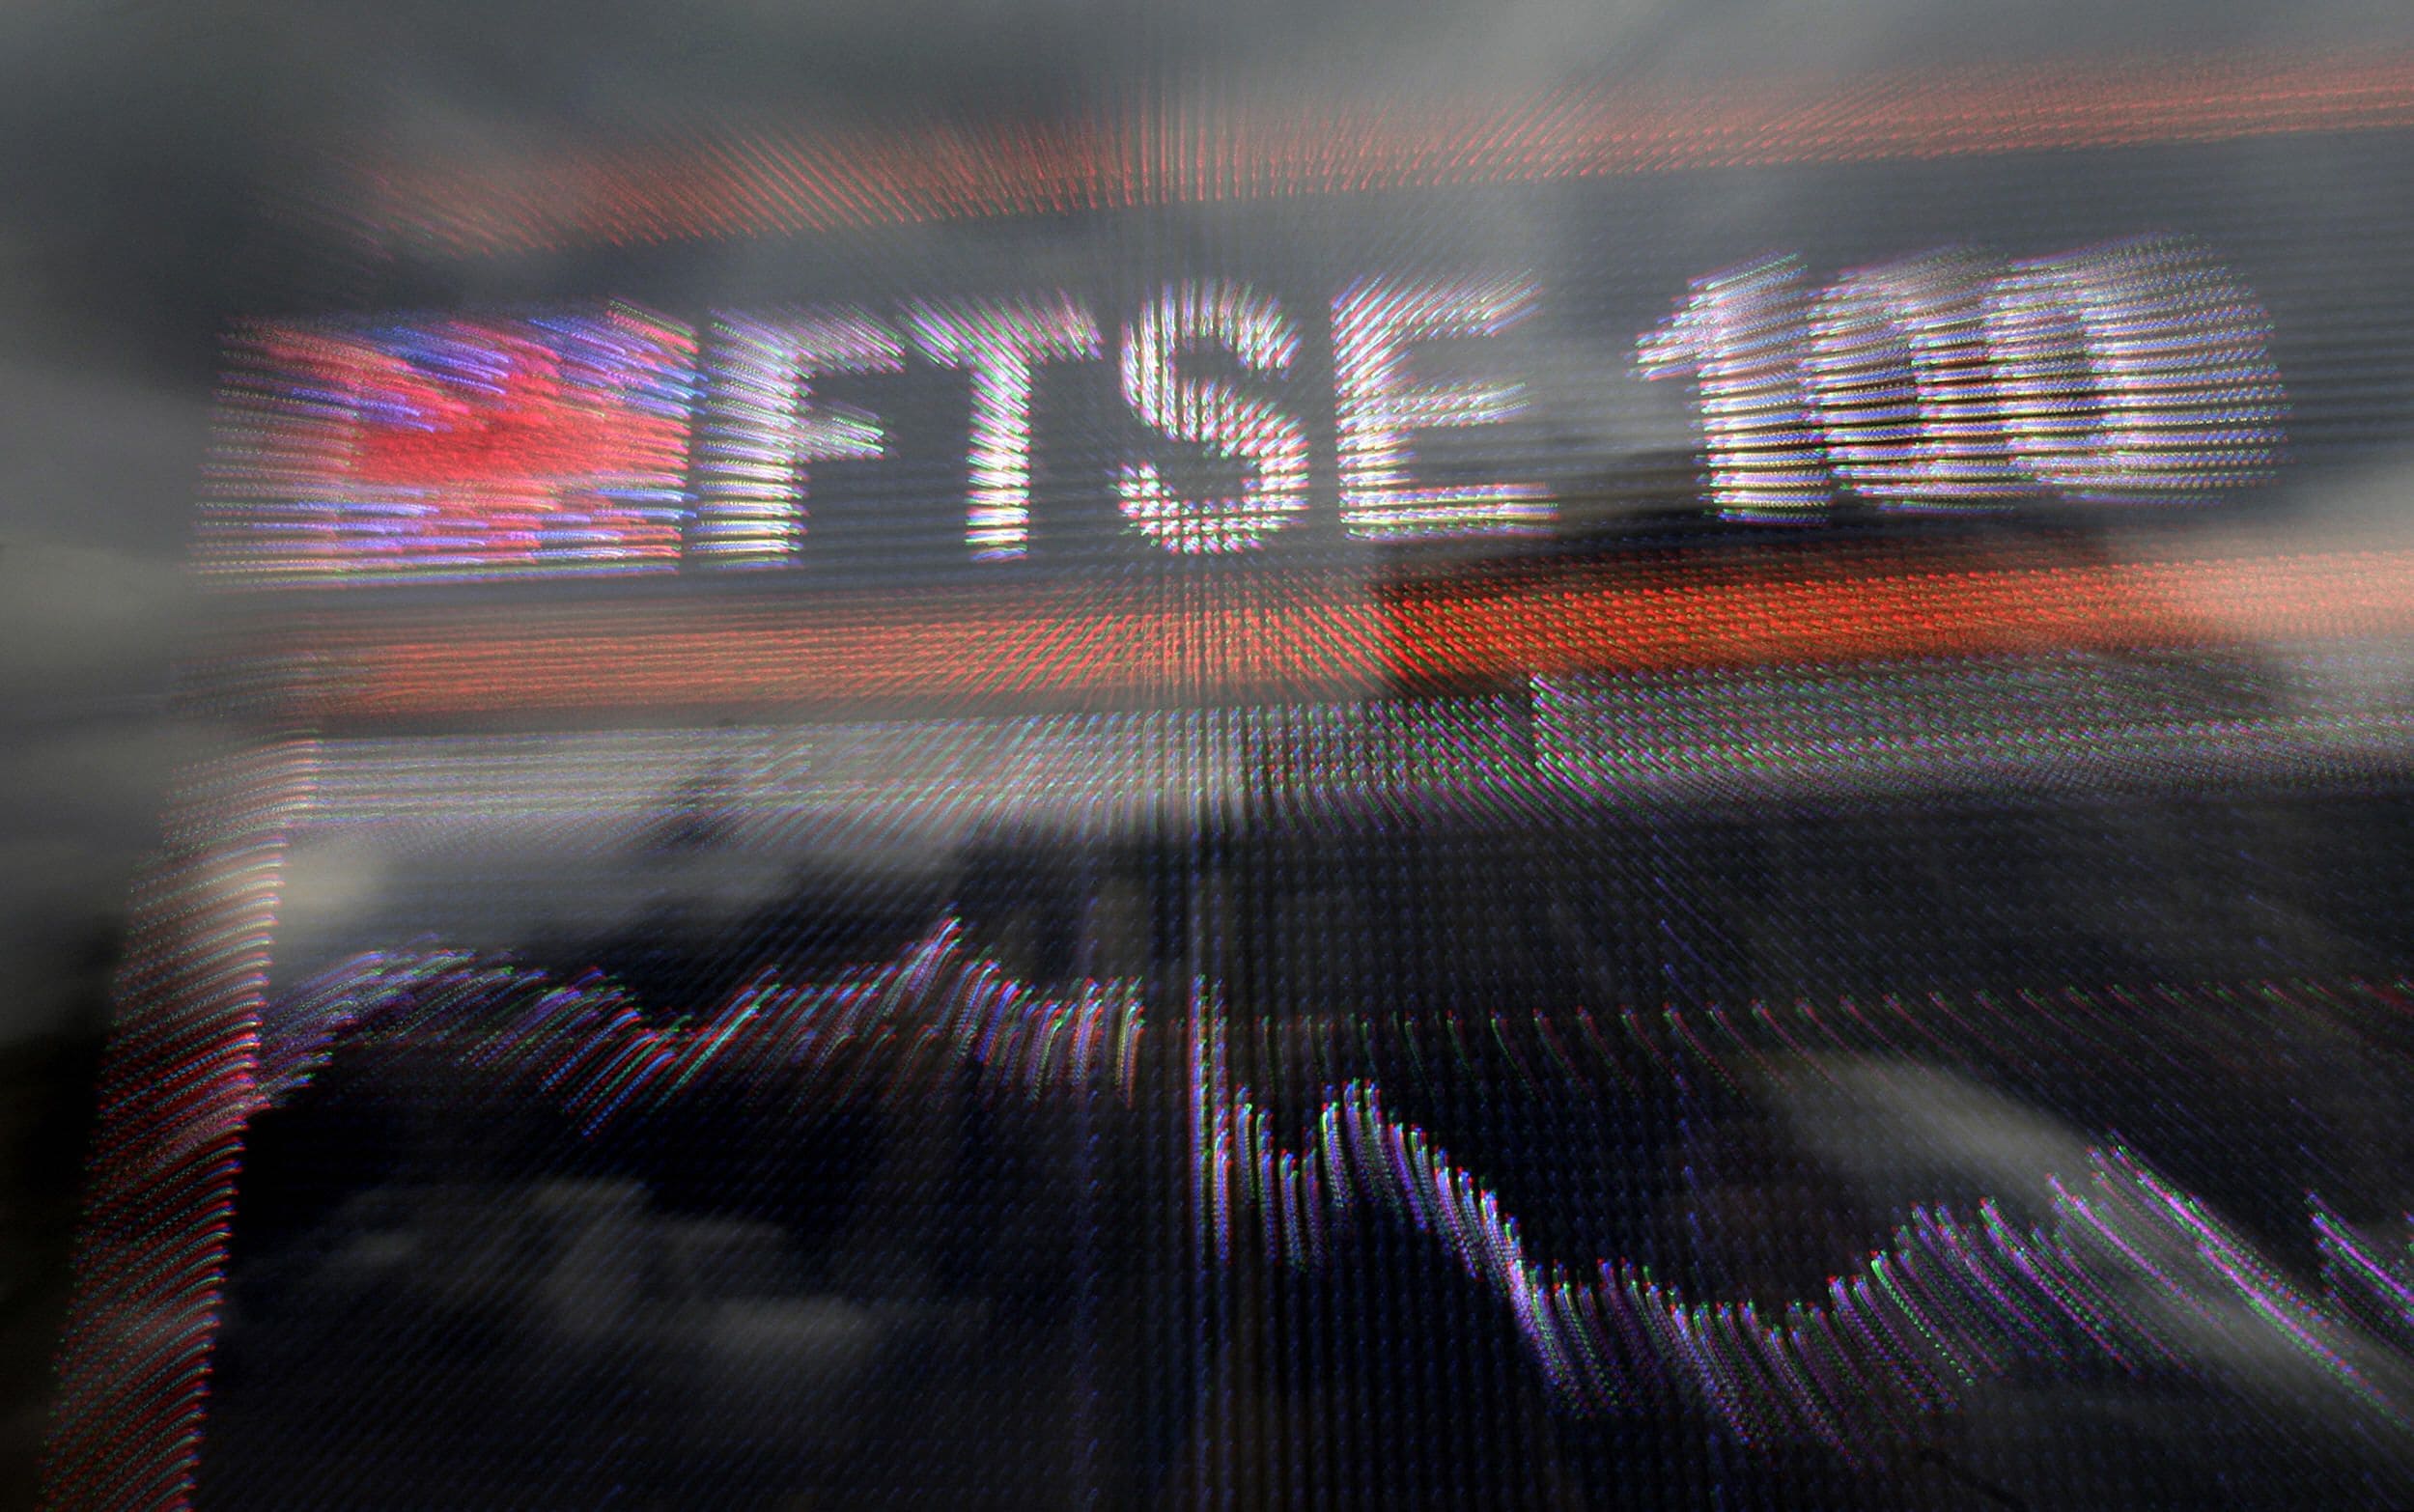 A FTSE 100 stock board with fluctuating price action